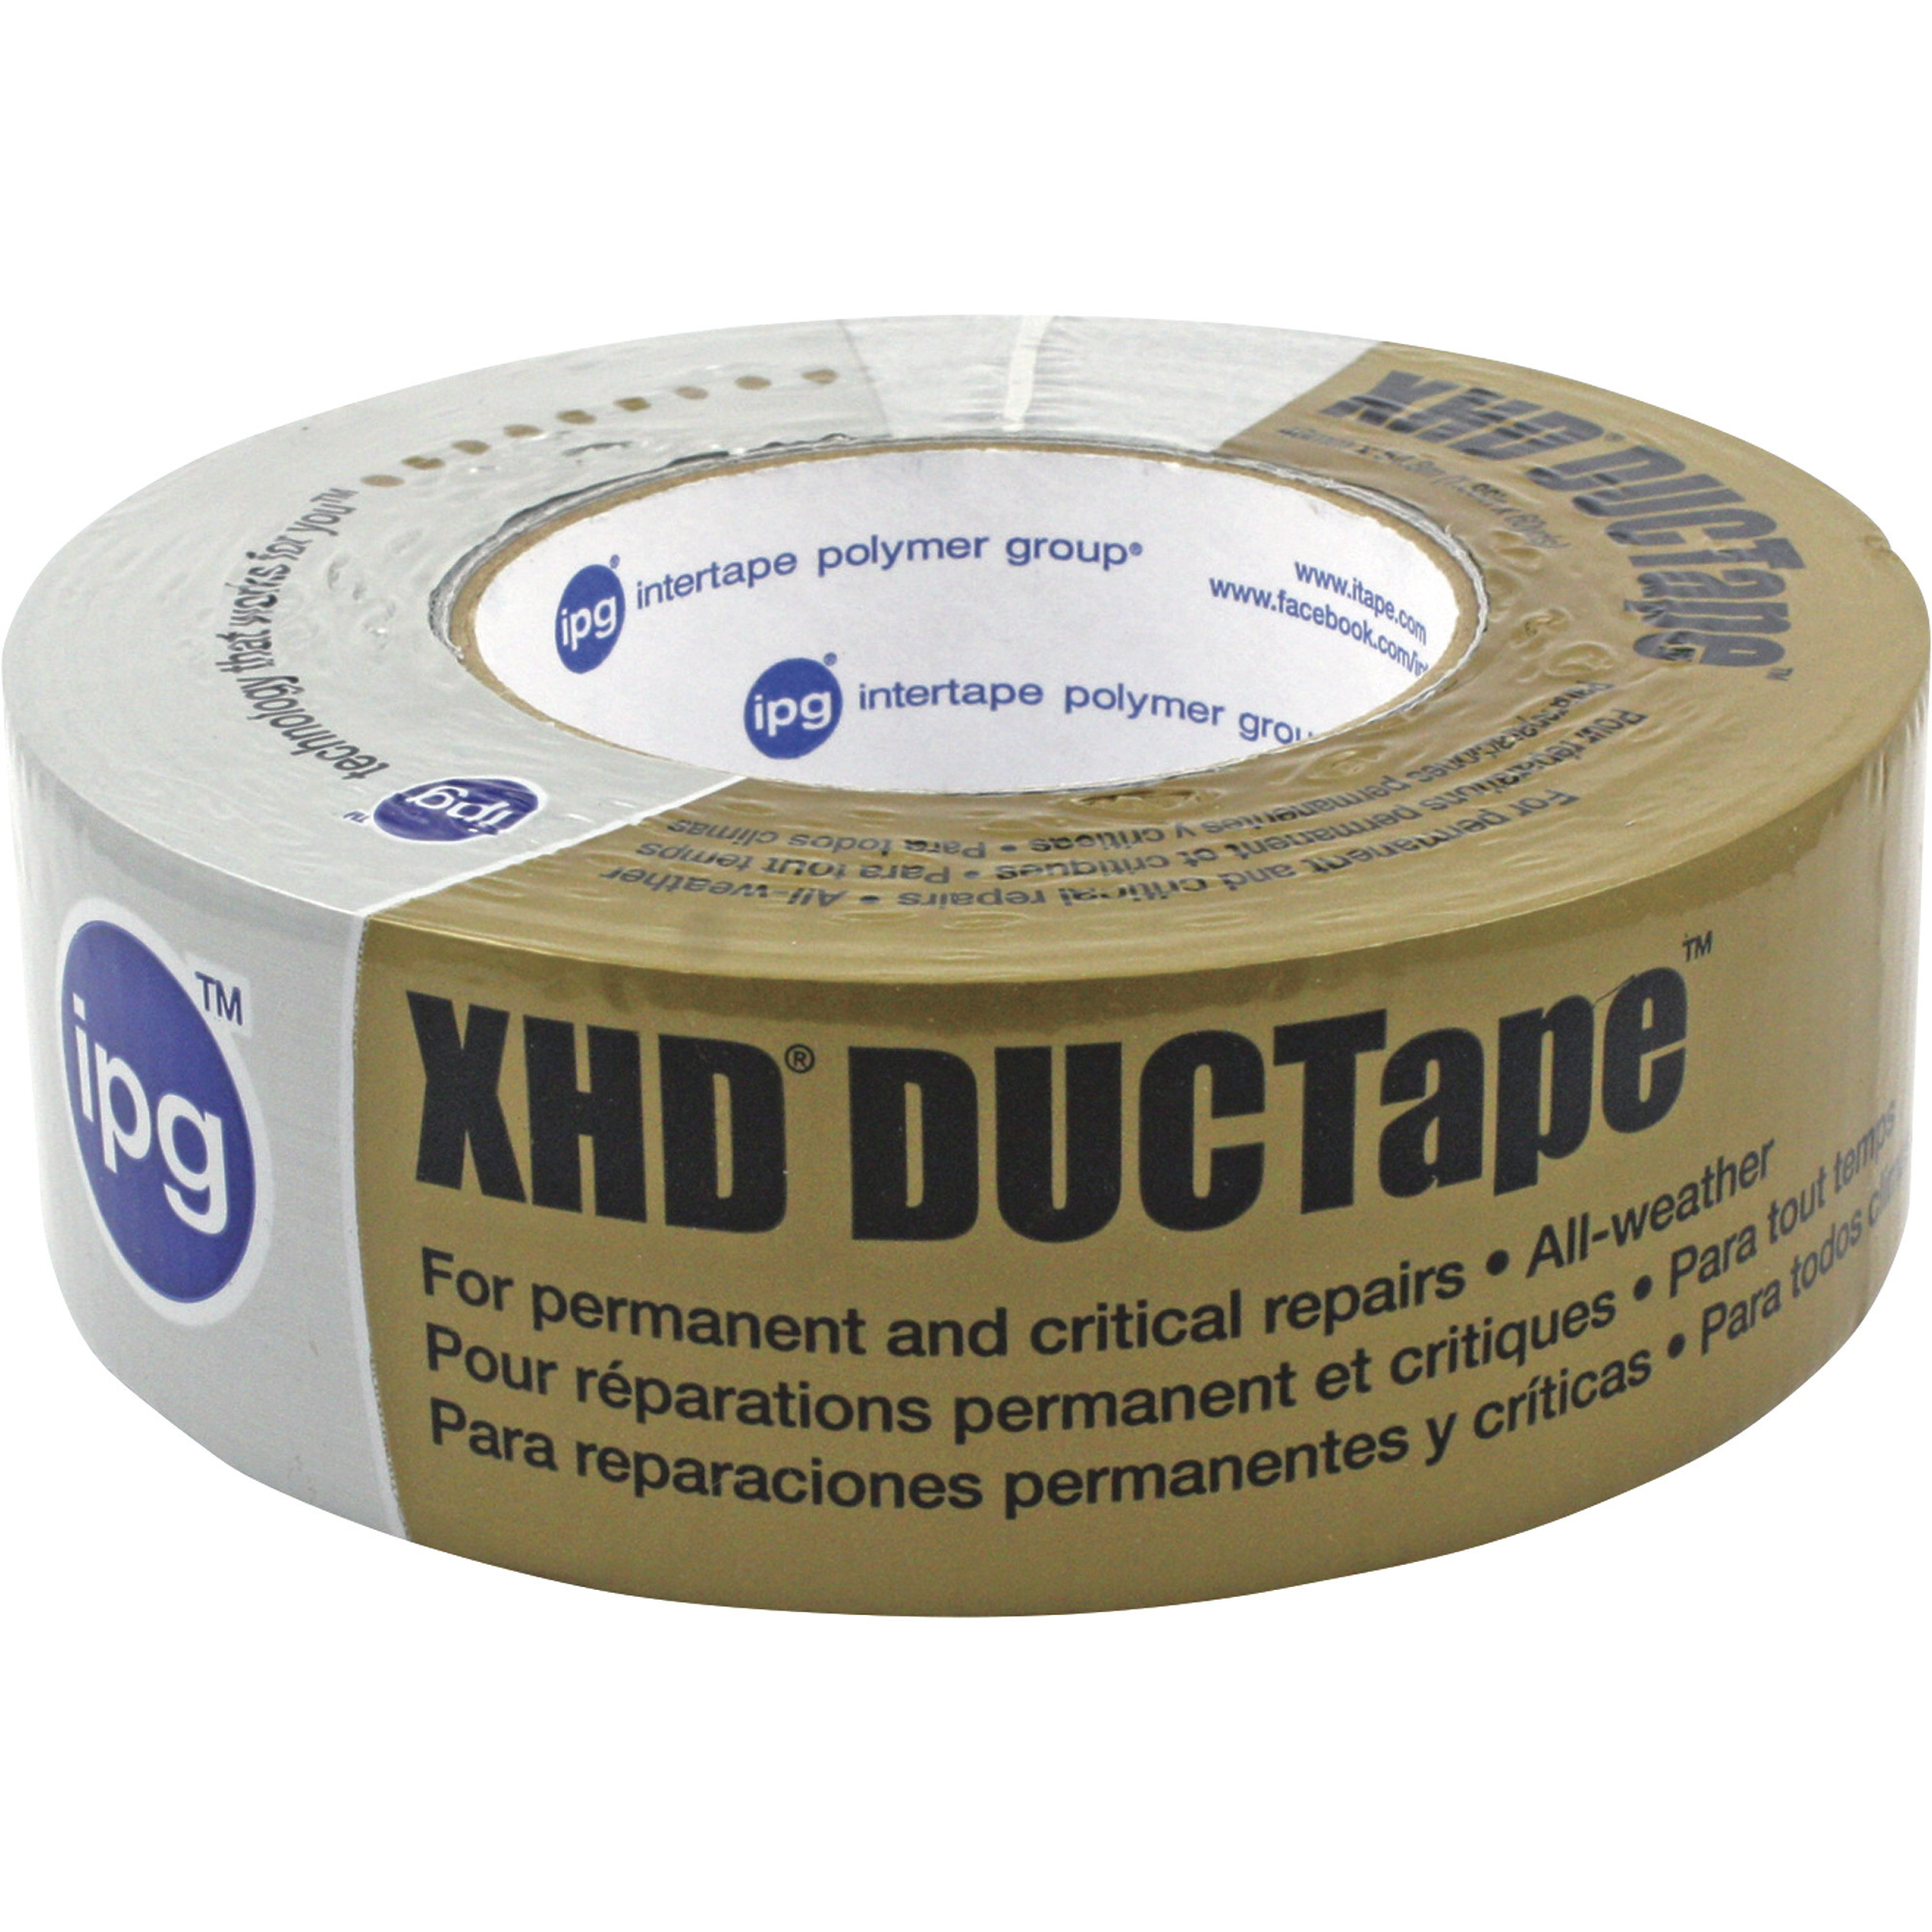 Contractor Grade (Duct) Tape â 2Inch x 60 Yard Length, Gray